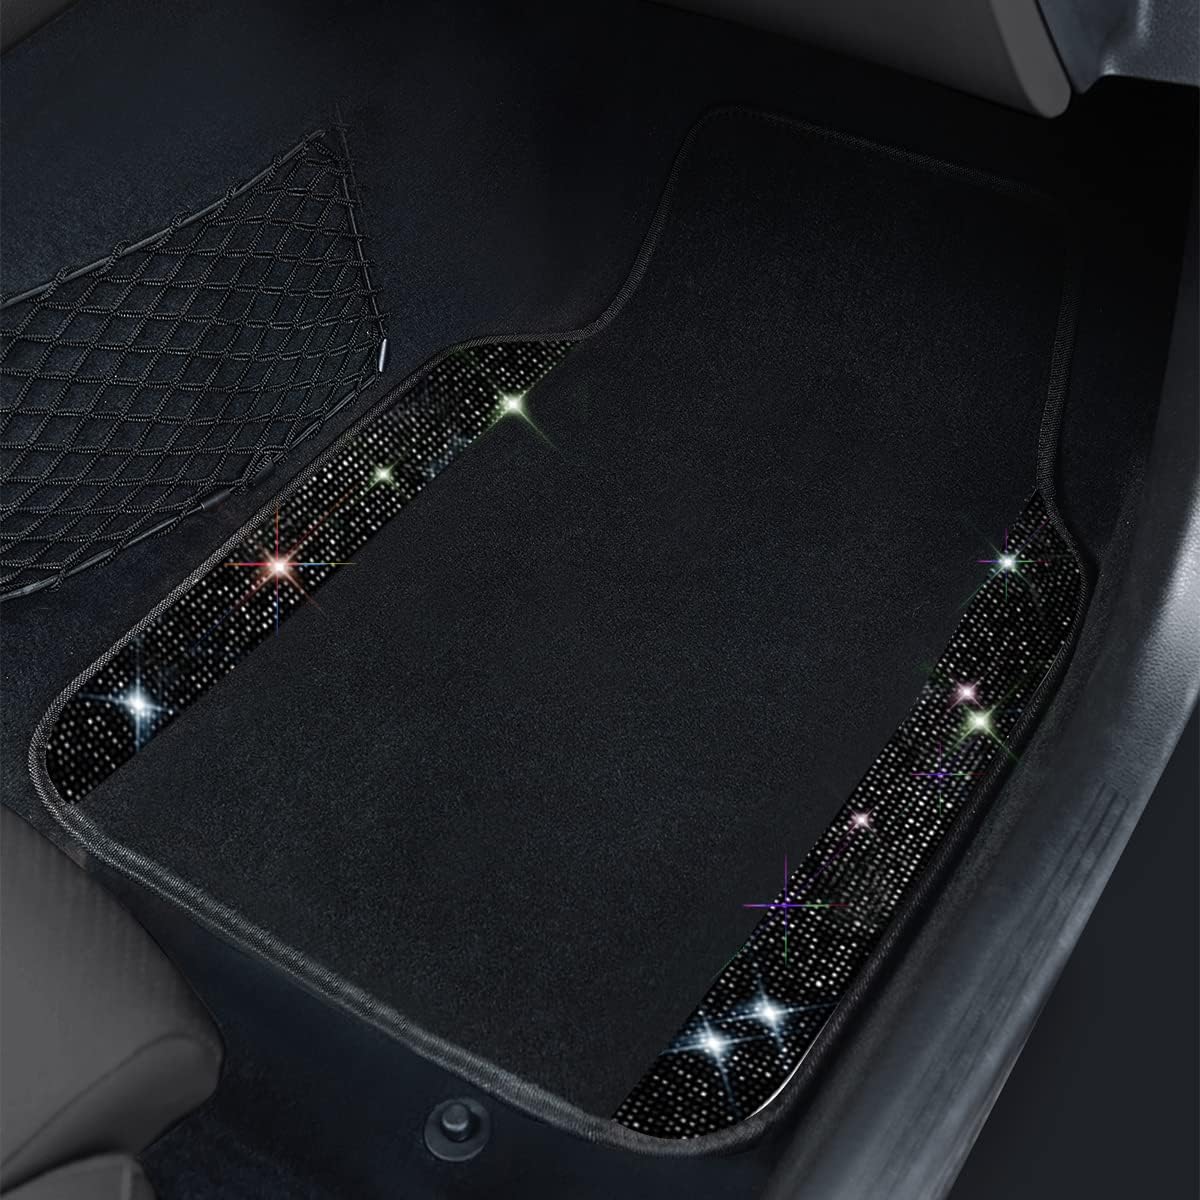 CAR PASS Iridescent Diamond Nappa Calfskin Leather Cushioned,Bling Seat Covers & Steering Cover & Car Floor Mats Universal Fit for Auto SUV Sedan,Sparkly Glitter Shining Rhinestone, Black